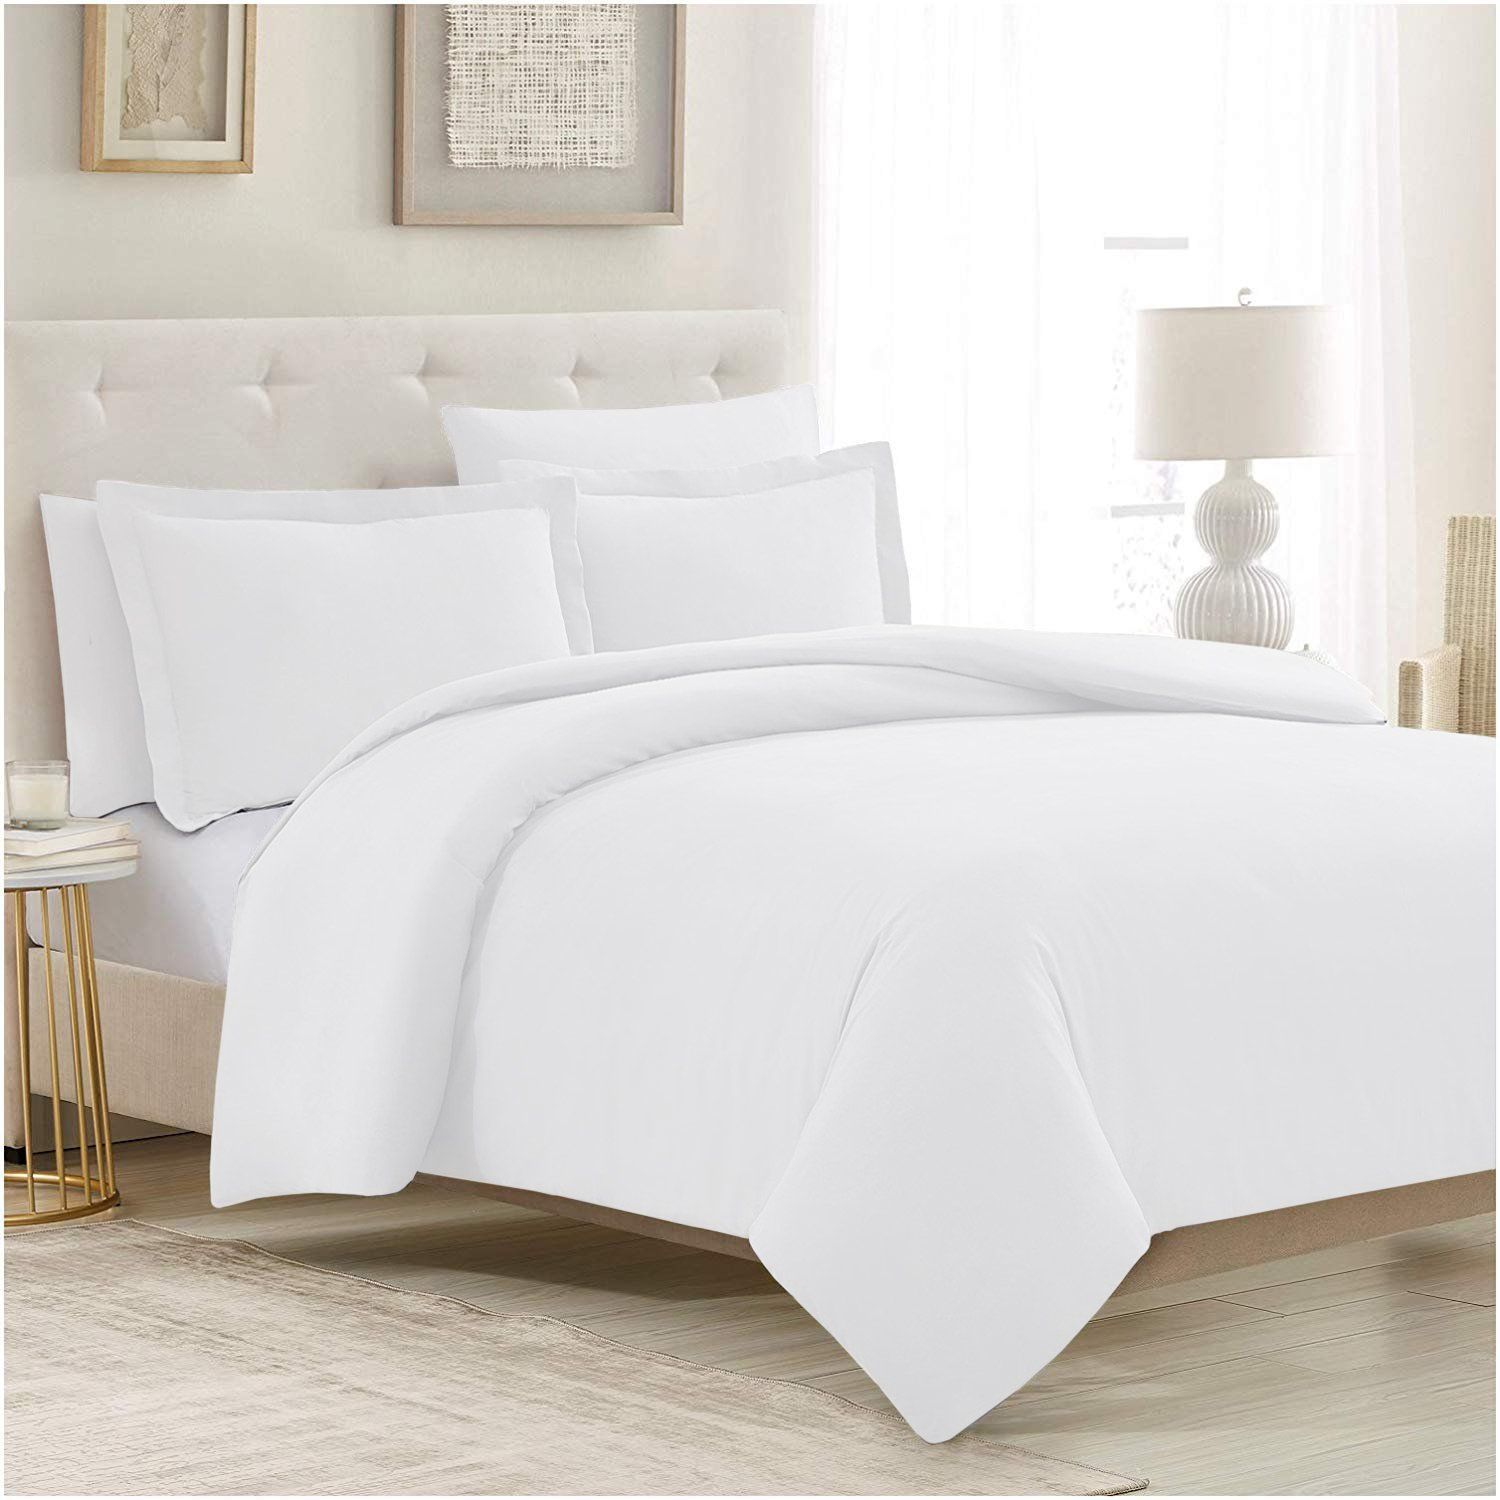 10 Best Duvet Covers Top Rated, What S The Size Of A Queen Duvet Cover